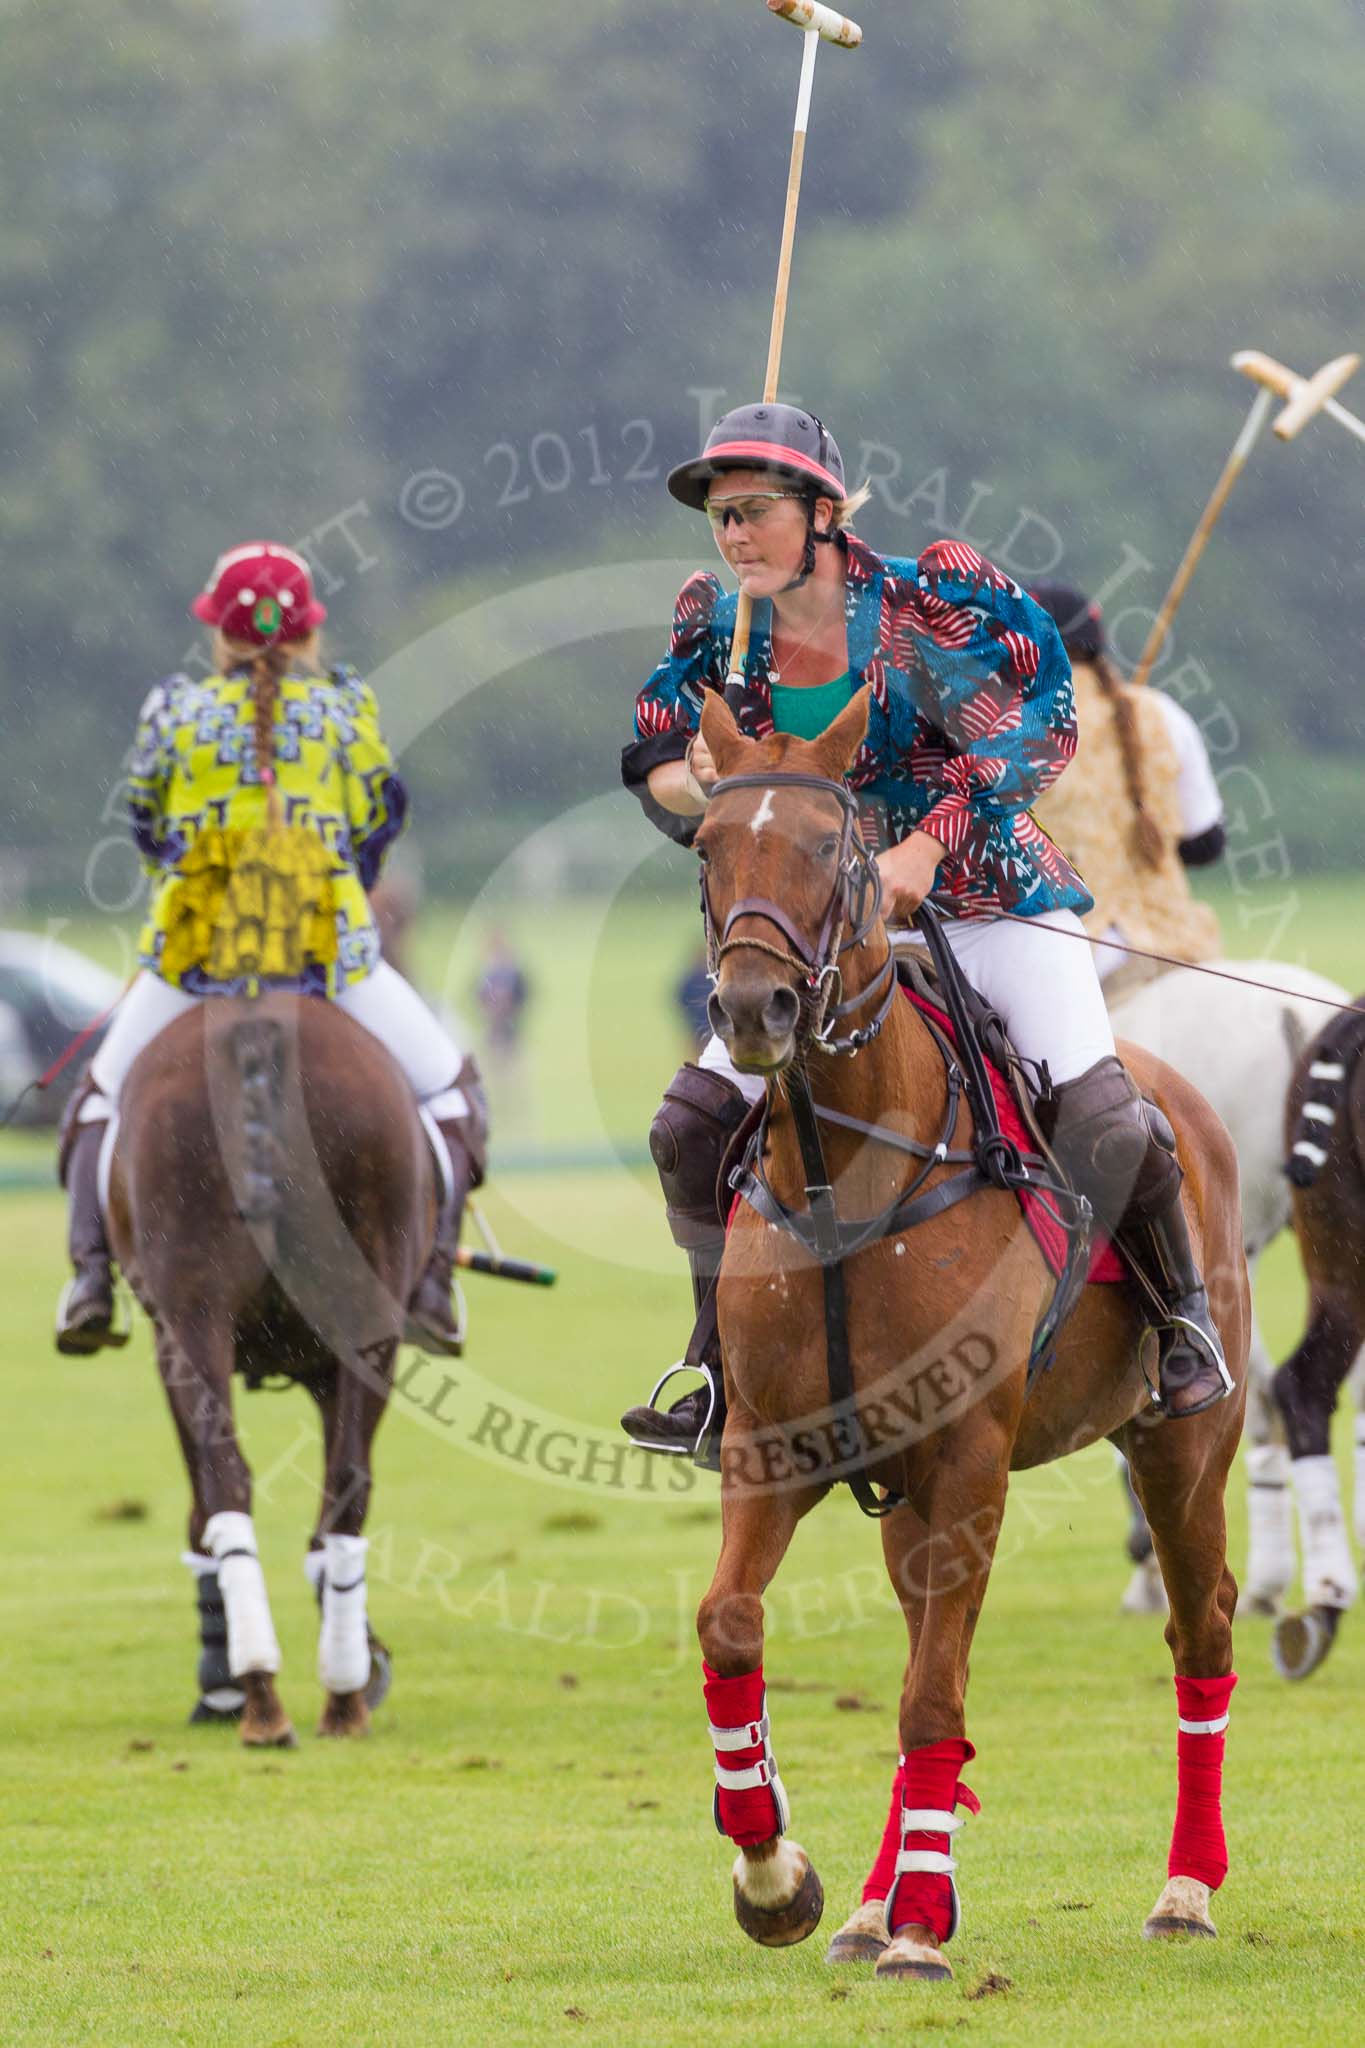 7th Heritage Polo Cup semi-finals: Annabel McNaught-Davis riding back to the pony lines..
Hurtwood Park Polo Club,
Ewhurst Green,
Surrey,
United Kingdom,
on 04 August 2012 at 14:05, image #200